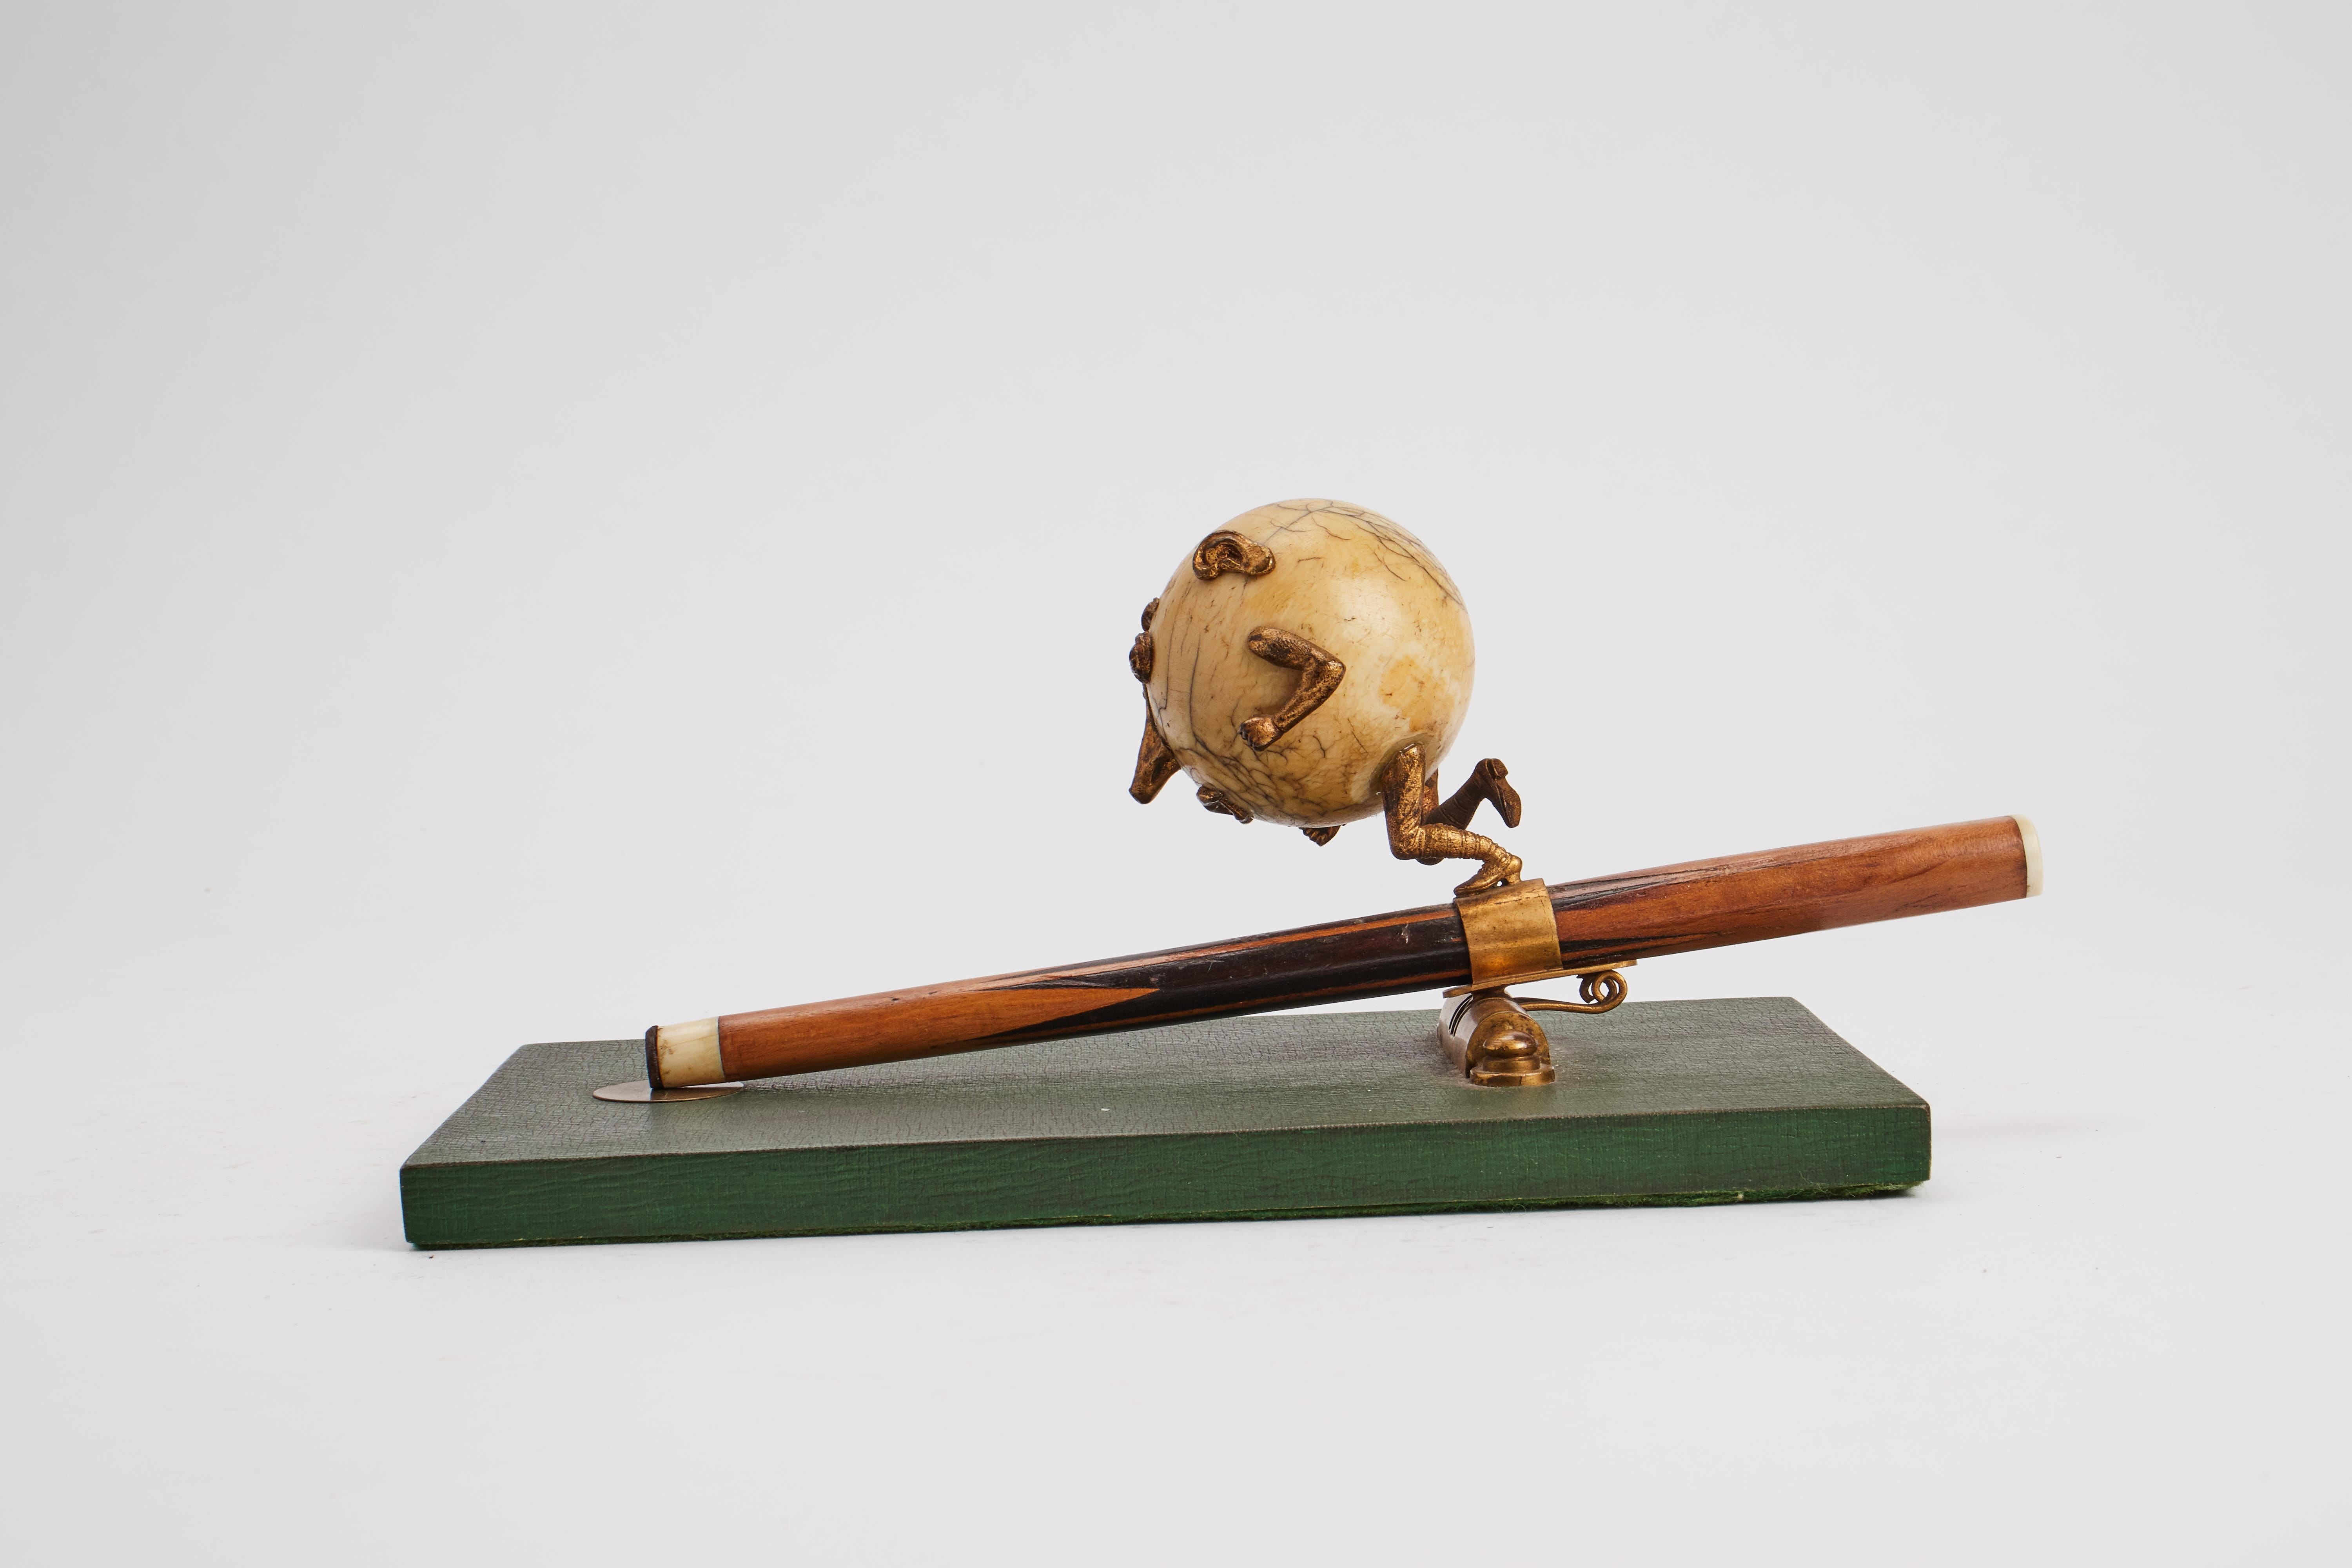 Wooden base, covered with green paper. A brass singe, with spring, holds the point of a billiard cue, over which runs the ivory billiard ball, as a caricatured face. England, end of 19th century. (SHIP TO EU ONLY)